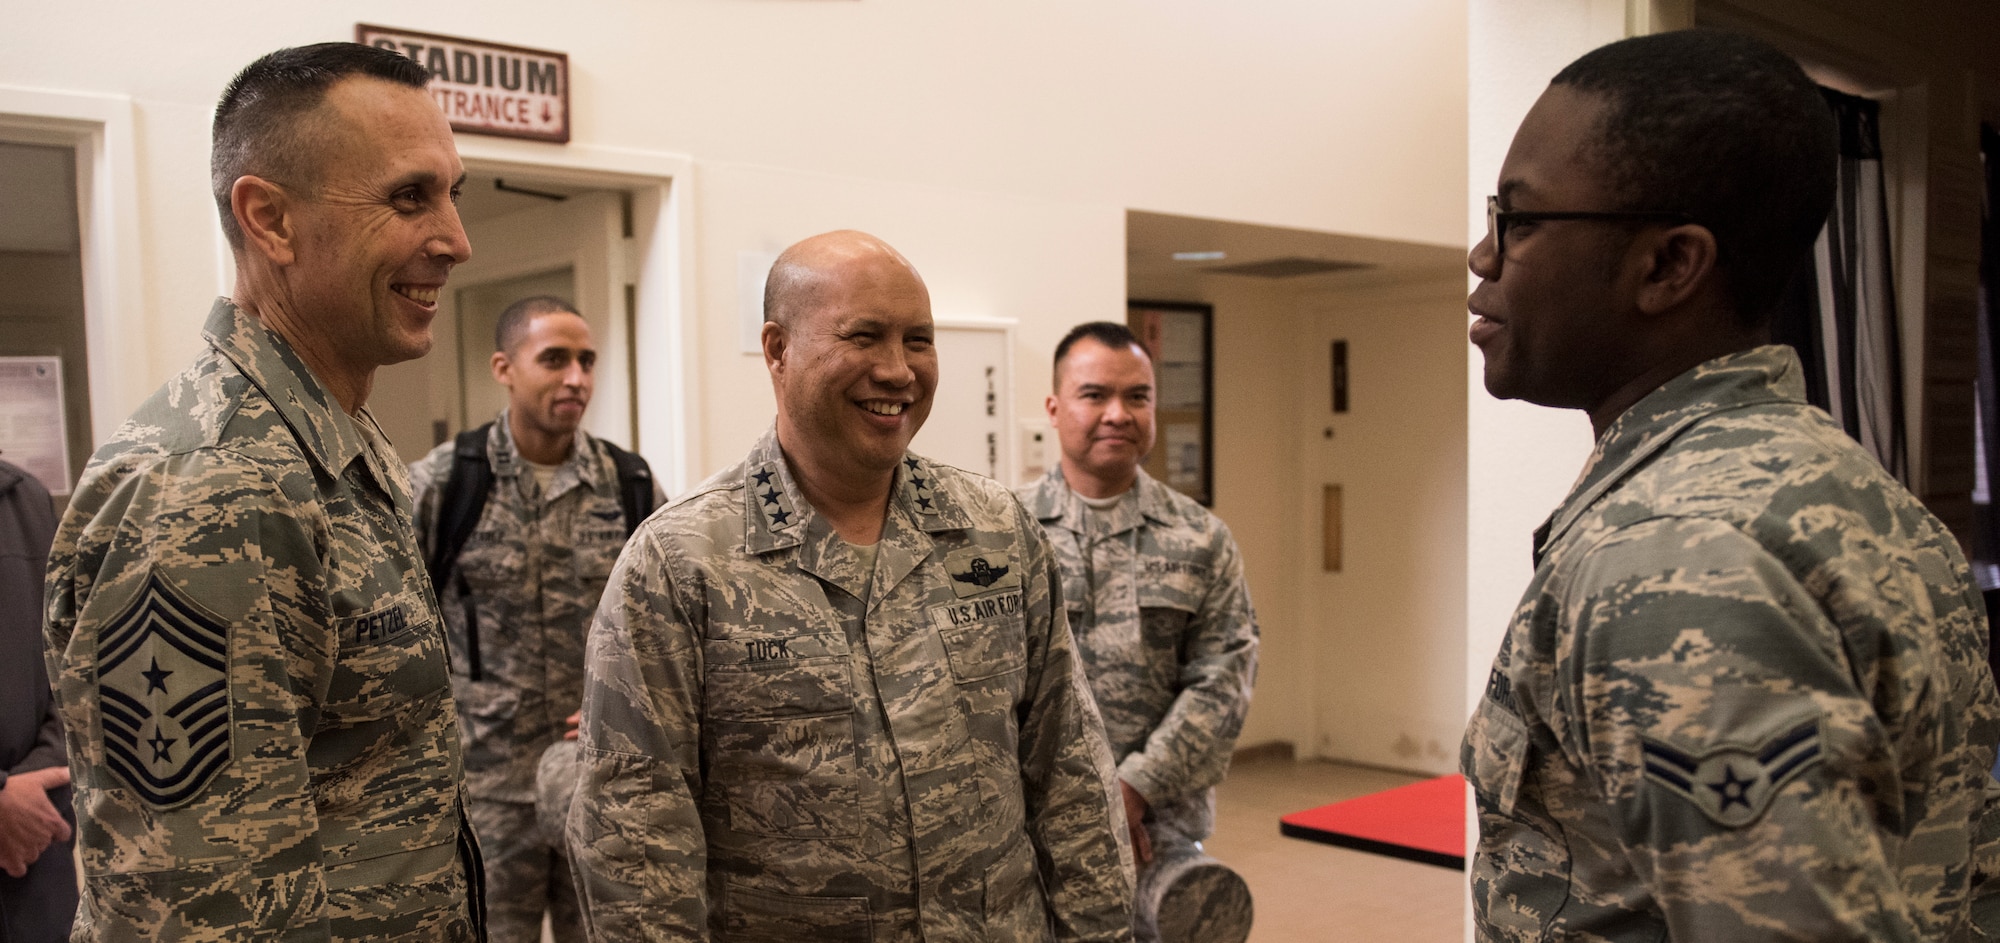 Lt. Gen. GI Tuck, 18th Air Force commander, and Chief Master Sgt. Todd Petzel, 18th AF command chief, talk with Airman Dorm Council representatives while touring the Airmen dorm campus March 20, 2018, at Fairchild Air Force Base, Washington. The visit familiarized 18th Air Force leadership with the Fairchild mission and the Airmen who make it happen. (U.S. Air Force photo/Senior Airman Sean Campbell)